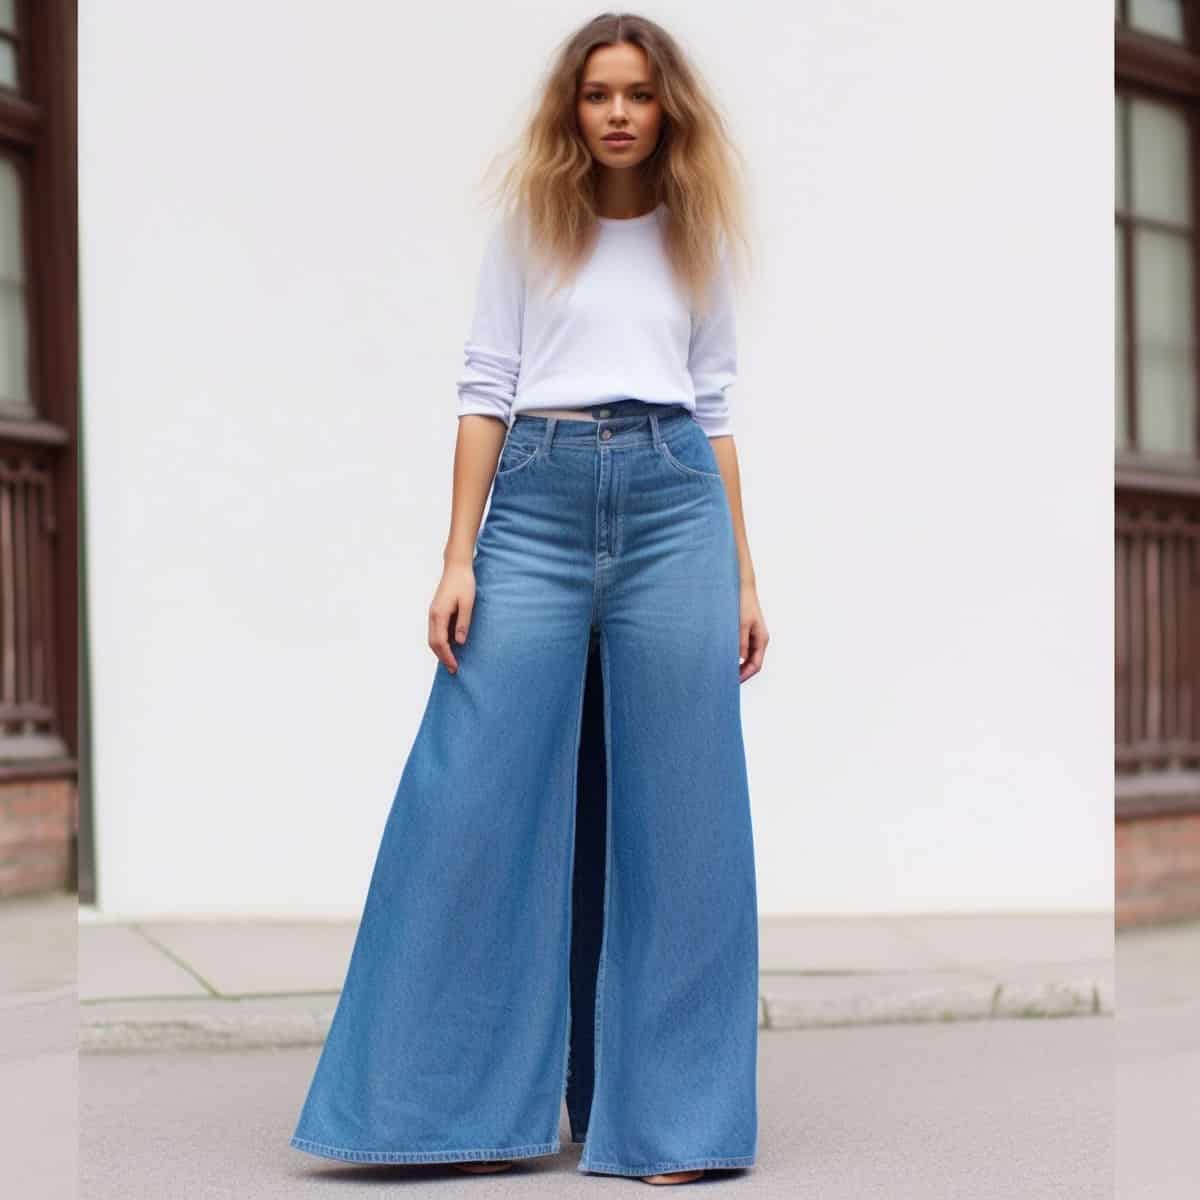 Ways To Style Flared Jeans For A Modern Look